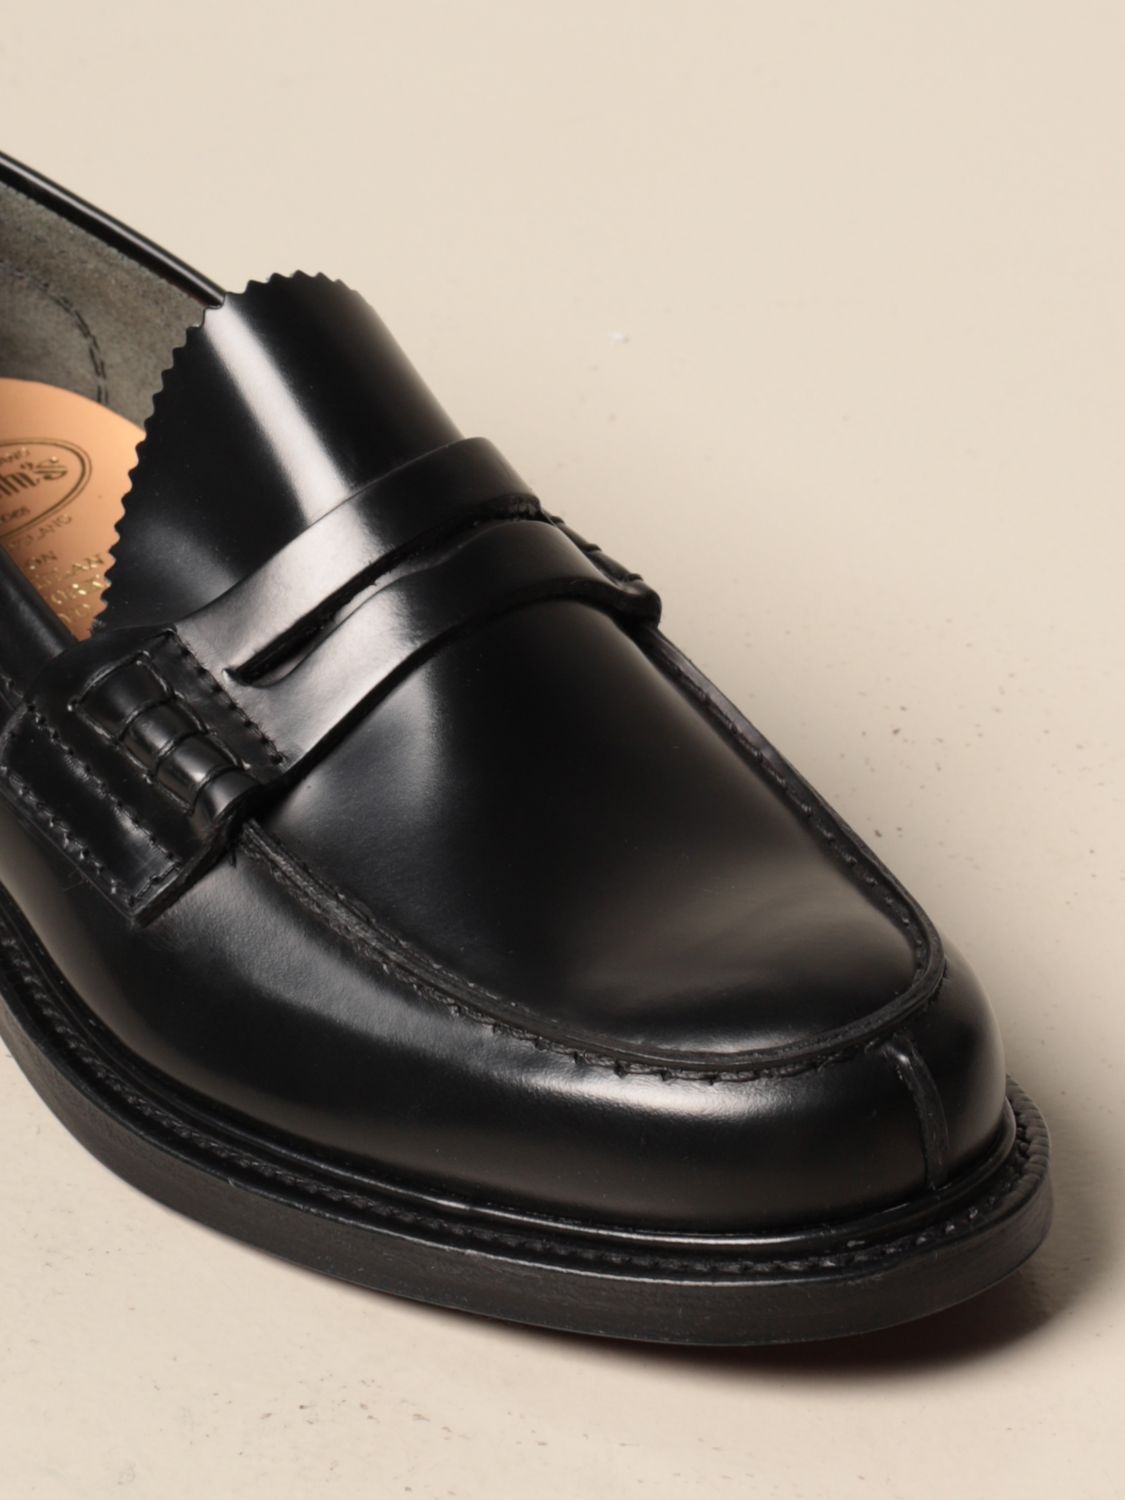 CHURCH'S: loafers for man - | Church's loafers EDB060 9LG online GIGLIO.COM